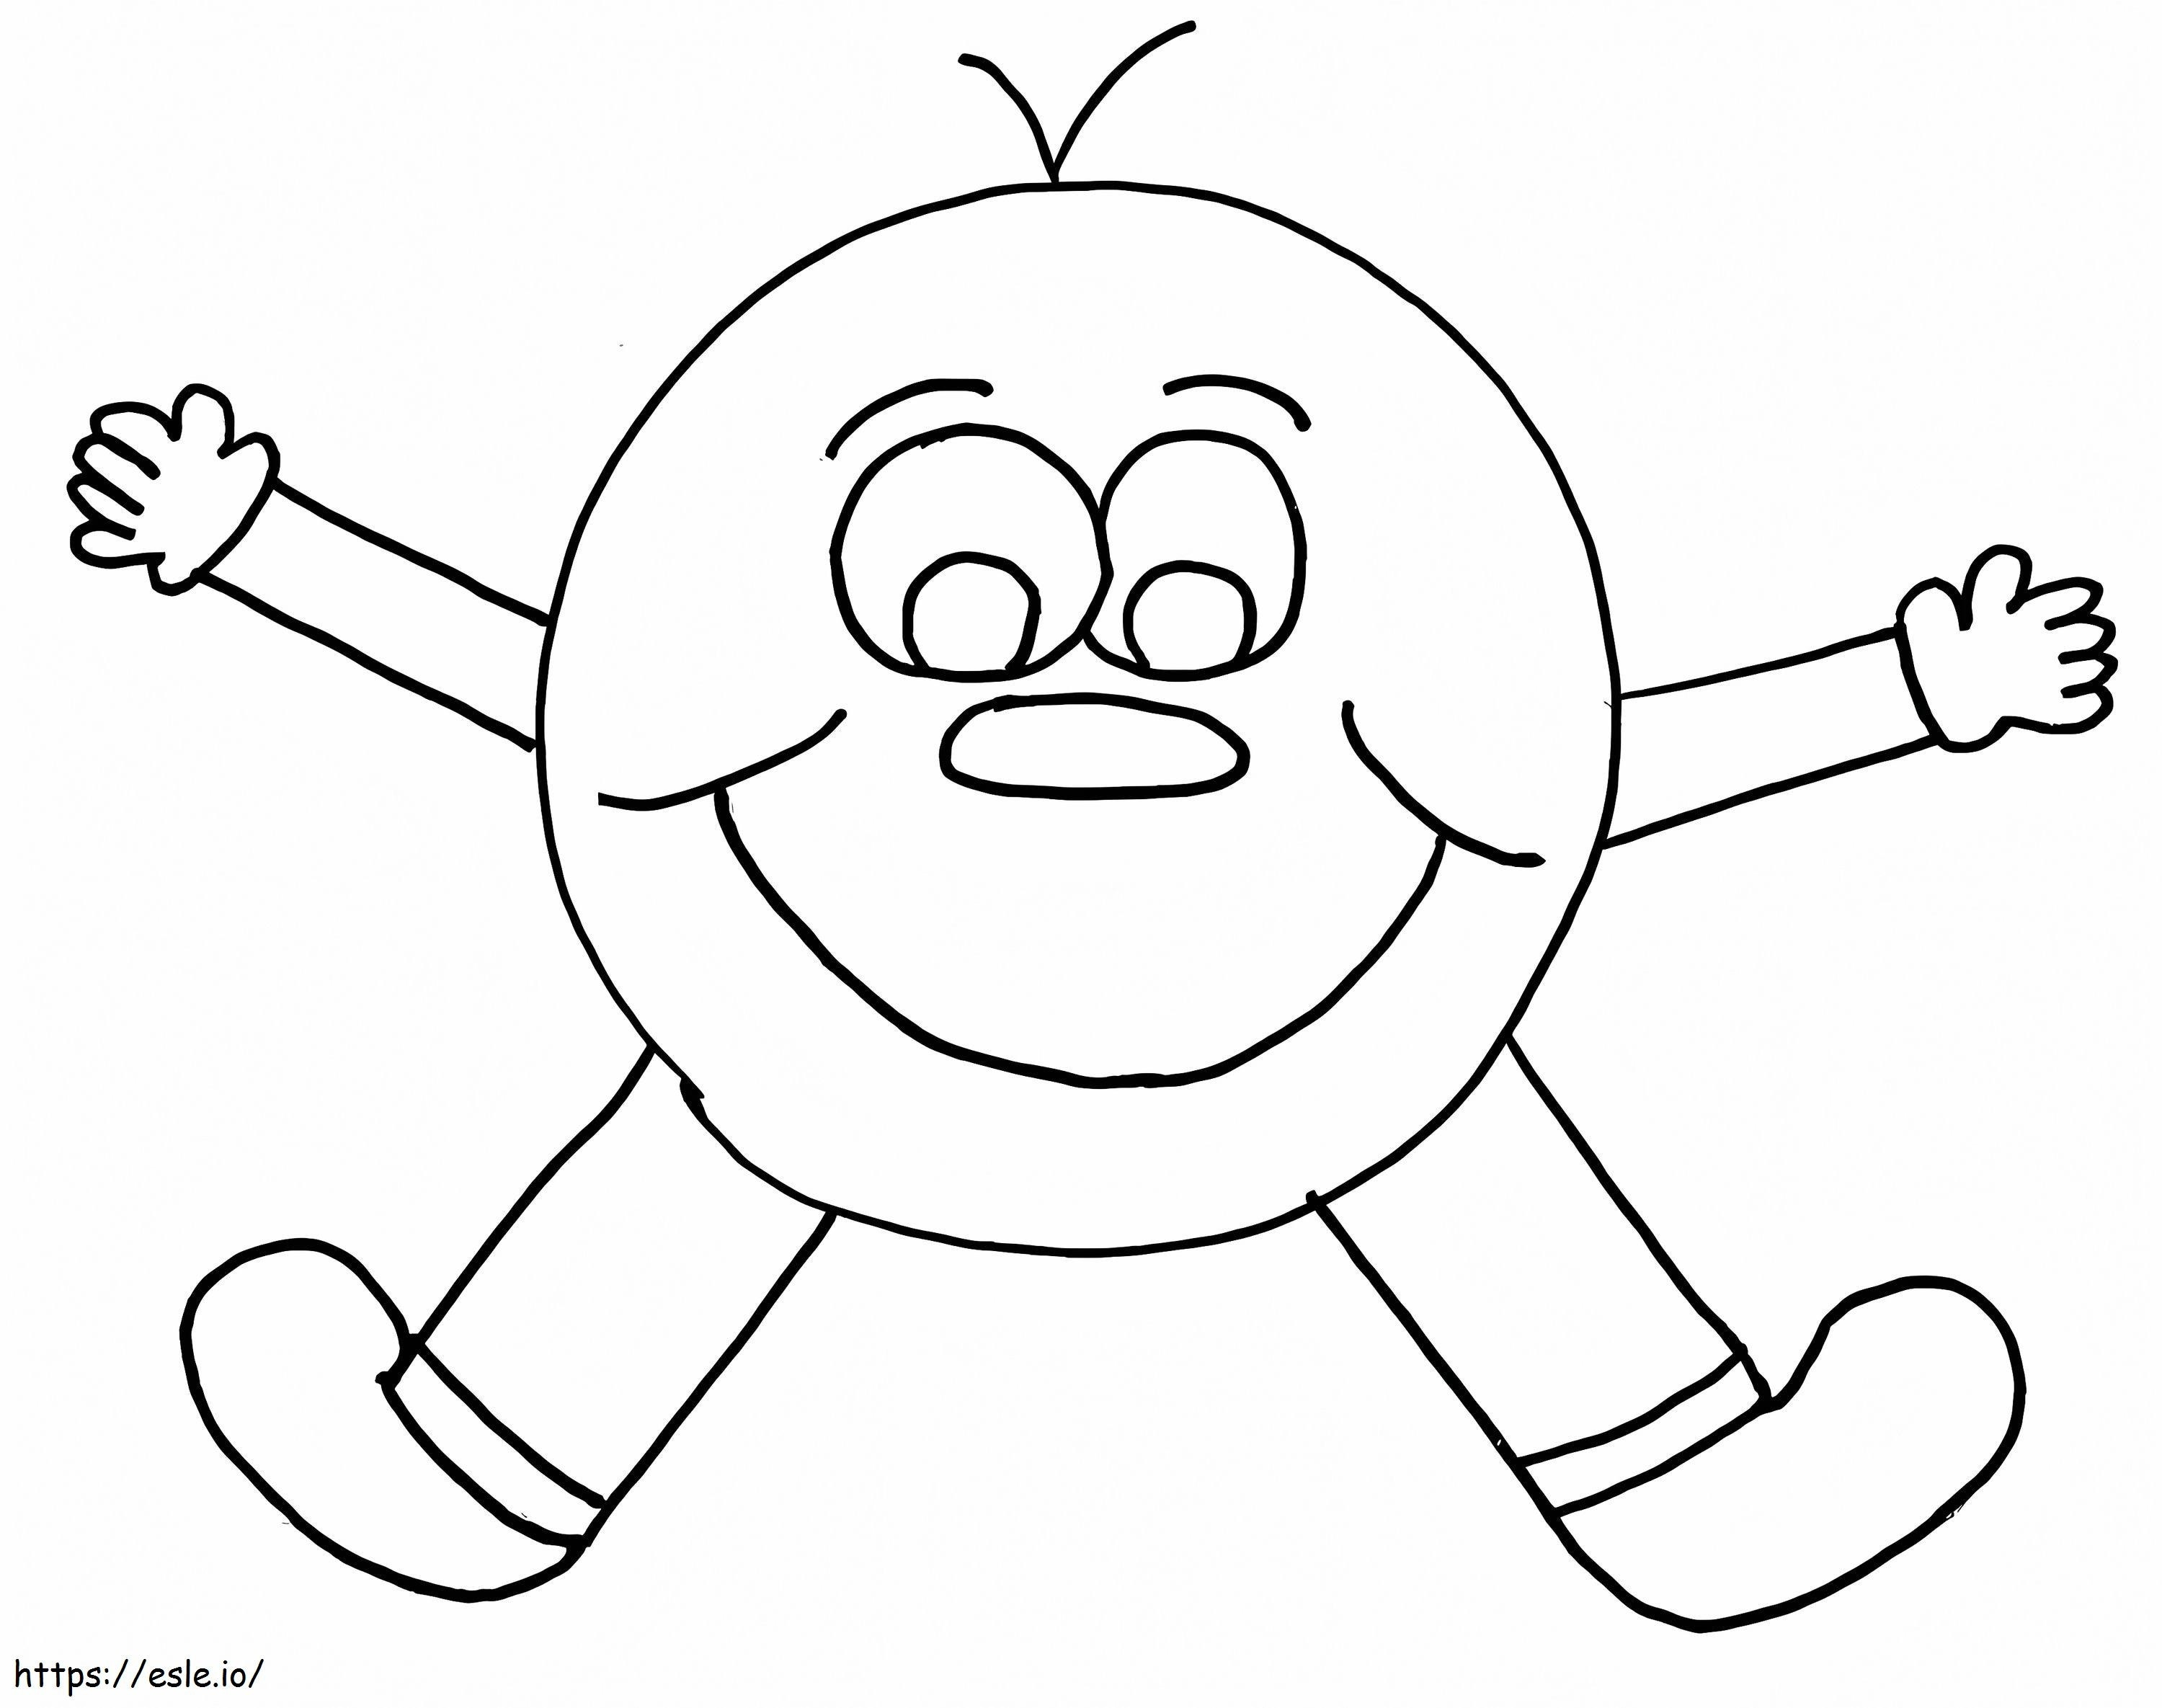 Smiley Face 7 coloring page